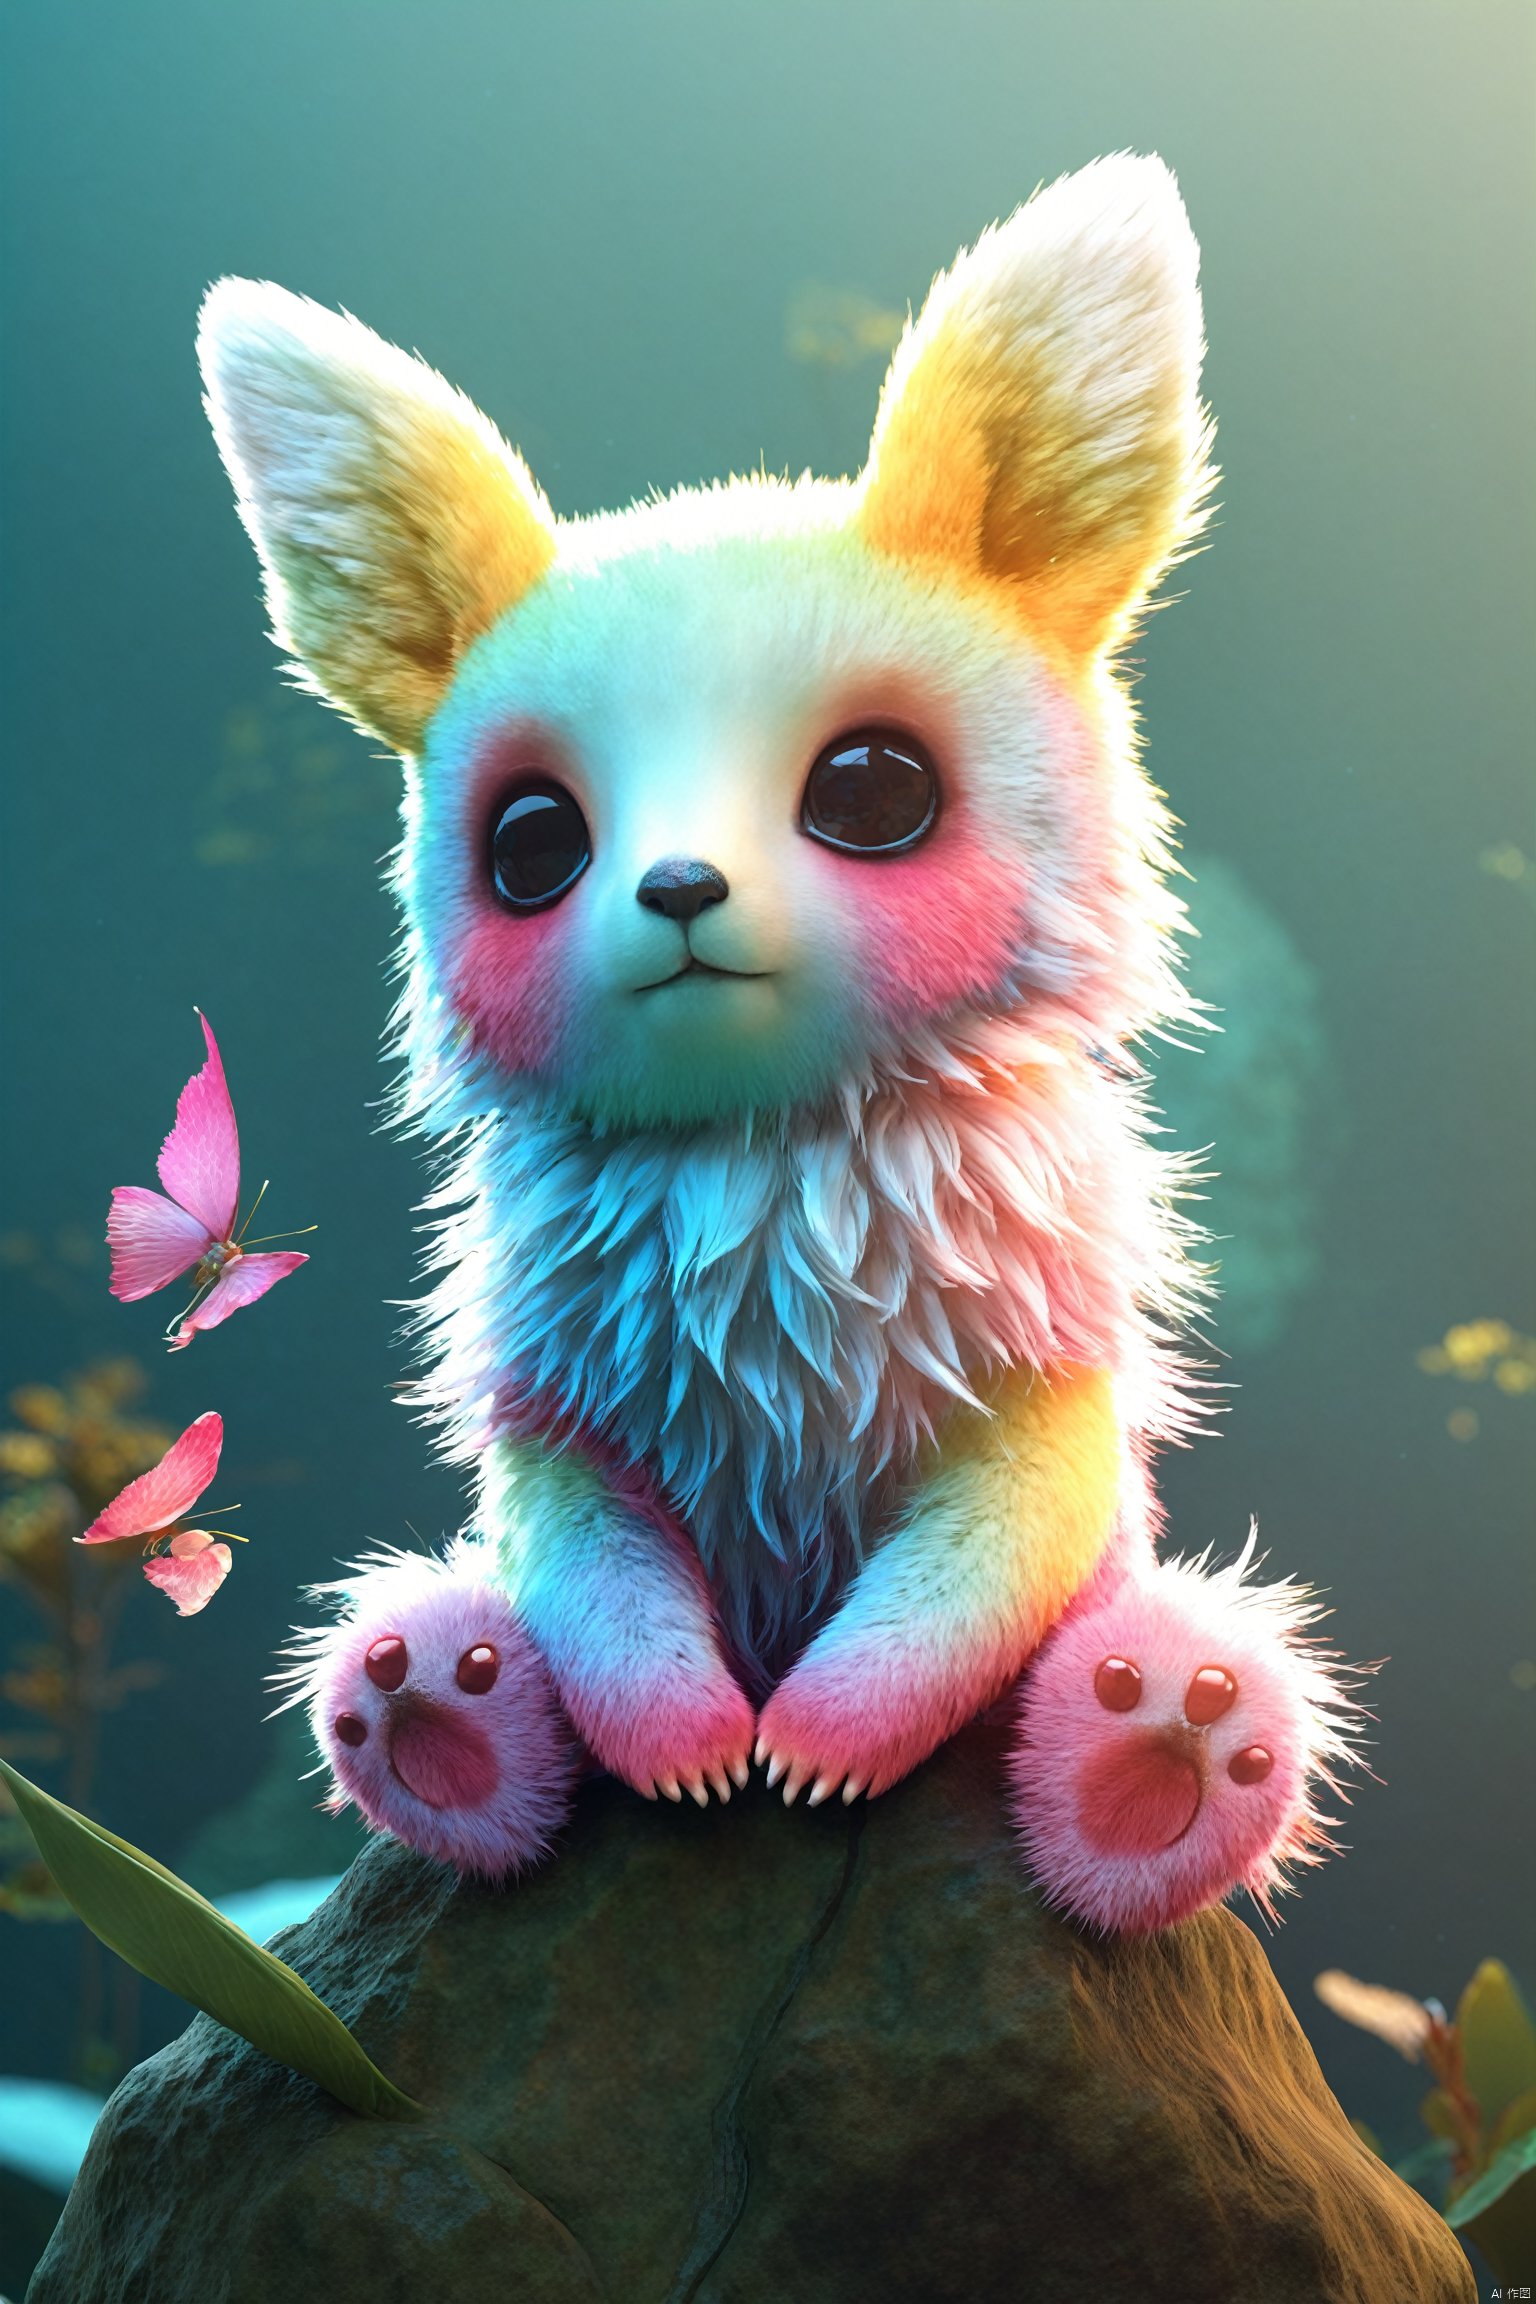  CUTE AND ADORABLE CUDDLY cute colorful creature FANTASY, DREAMLIKE, SURREALISM, SUPER CUTE, TRENDING ON ARTSTATION